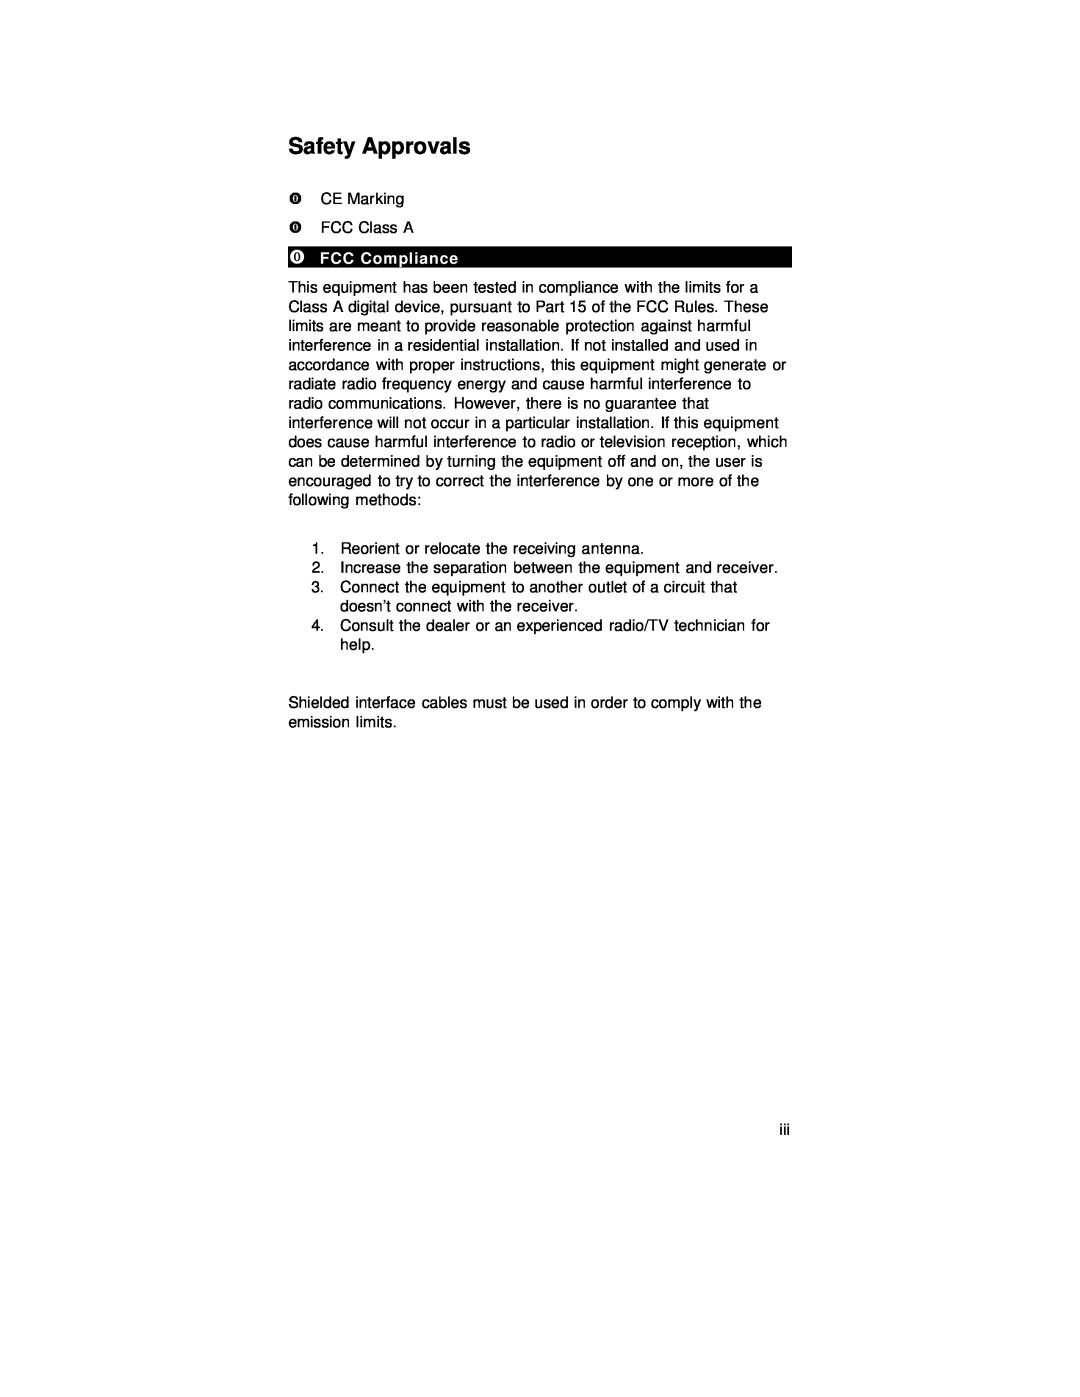 Intel N270, FPC 5084 user manual Safety Approvals, FCC Compliance 